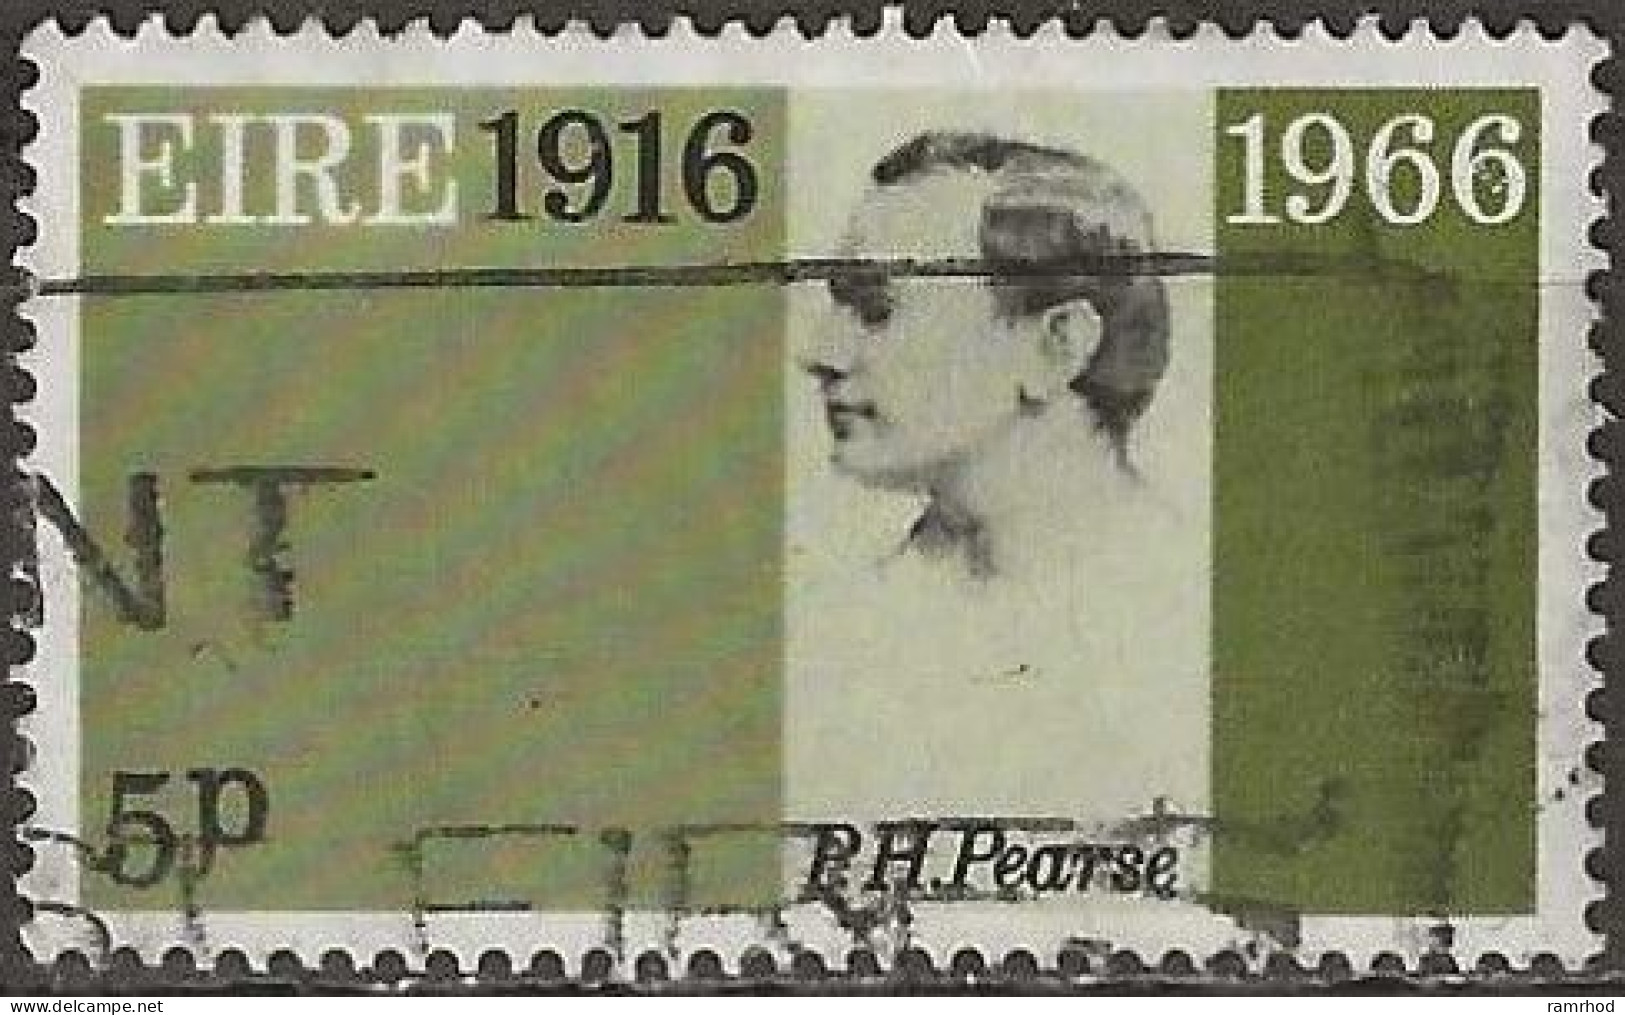 IRELAND 1966 50th Anniversary Of Easter Rising - 5d P. H. Pearse FU - Oblitérés